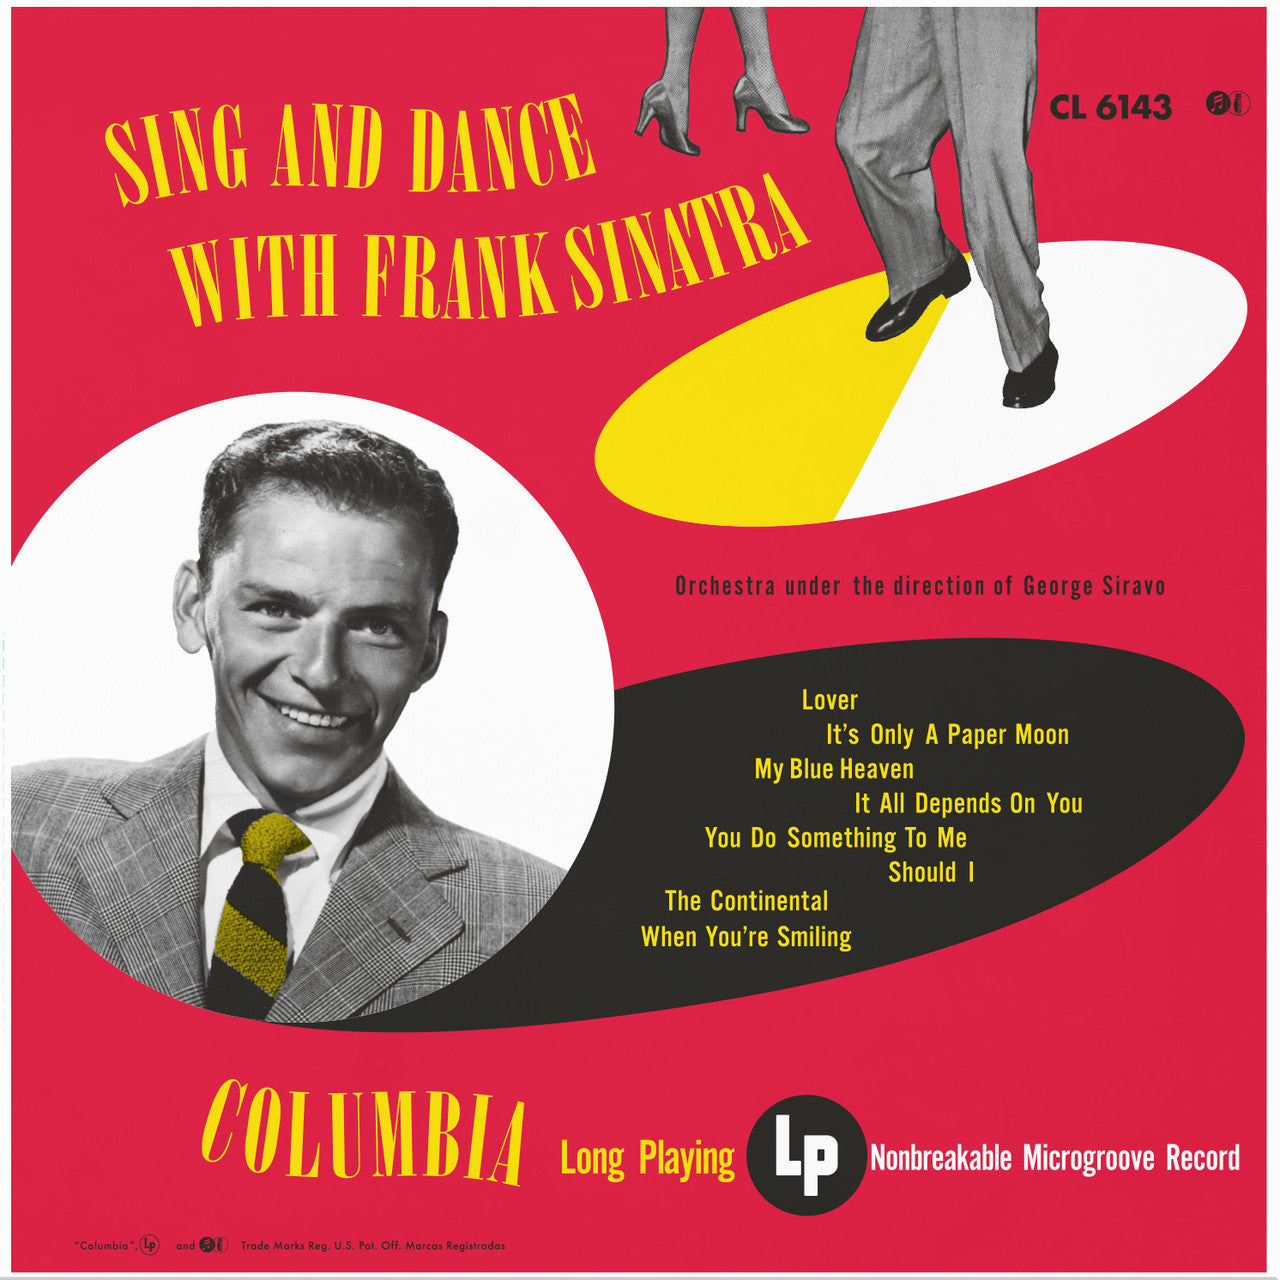 Frank Sinatra - Sing And Dance With Frank Sinatra